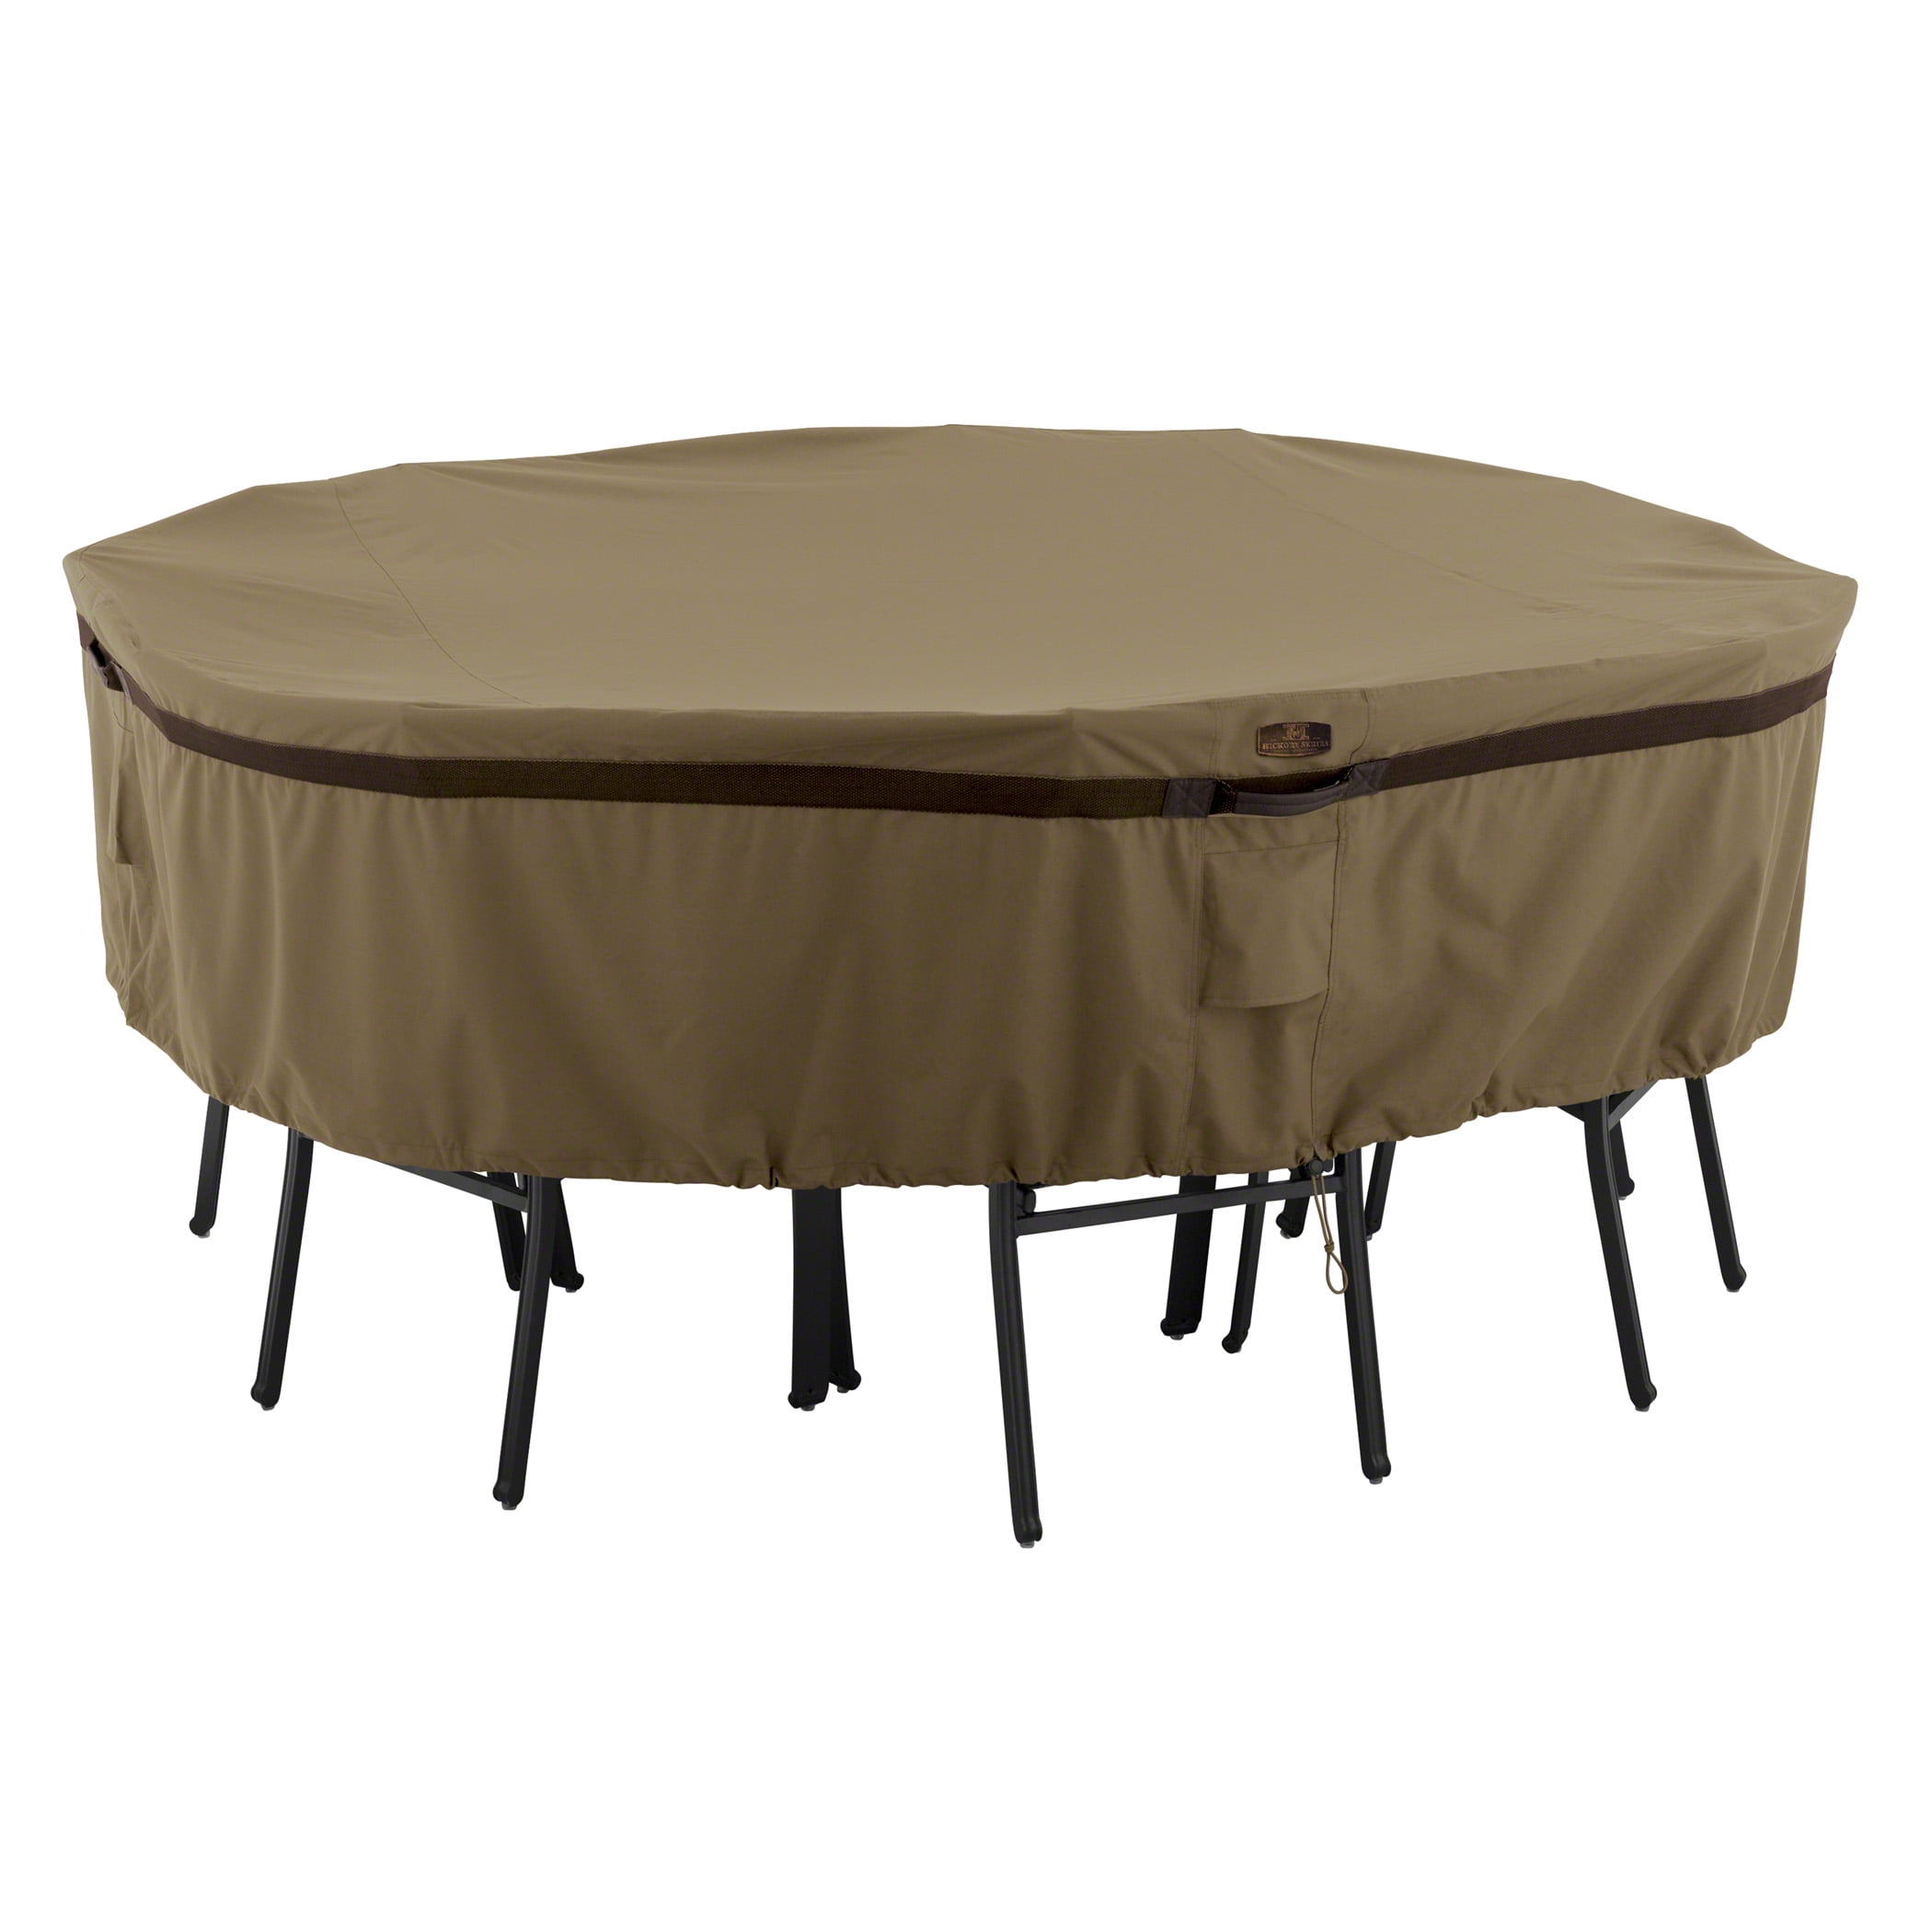 Details about   70" Waterproof Round Patio Set Cover Large Outdoor Table Chair Furniture Cover 